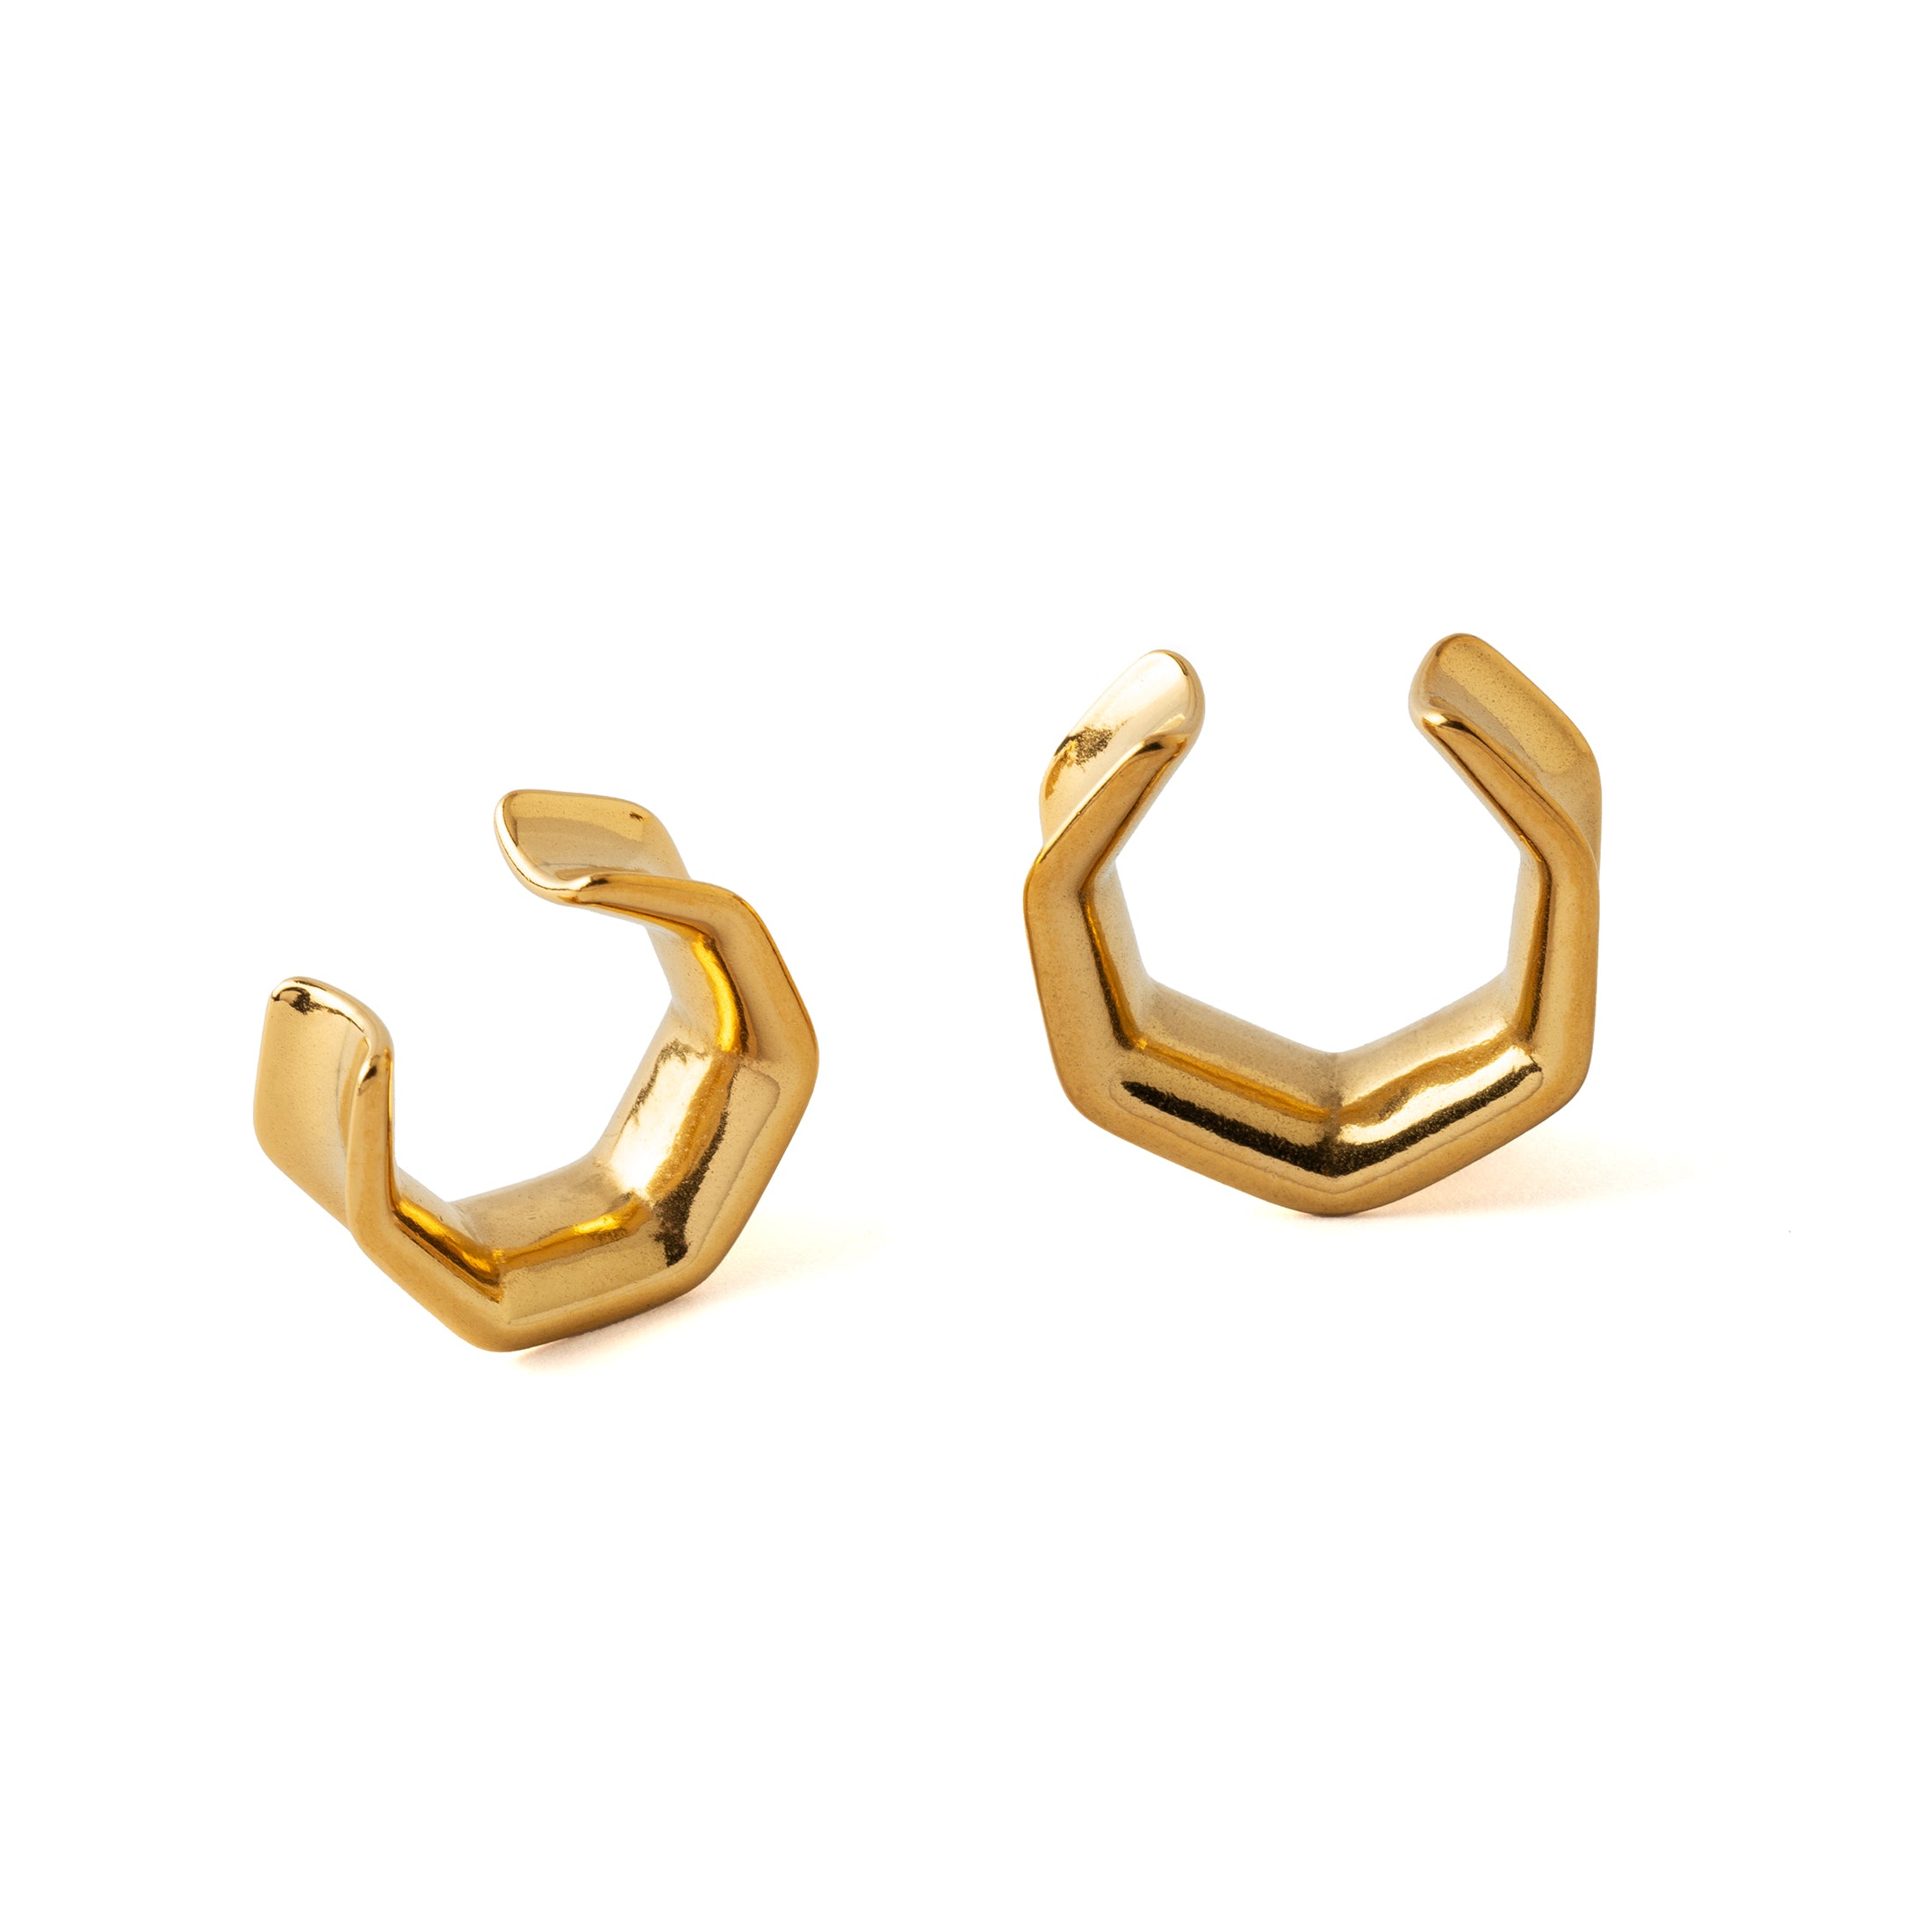 Pair of Golden Hexagon Saddles front and side view